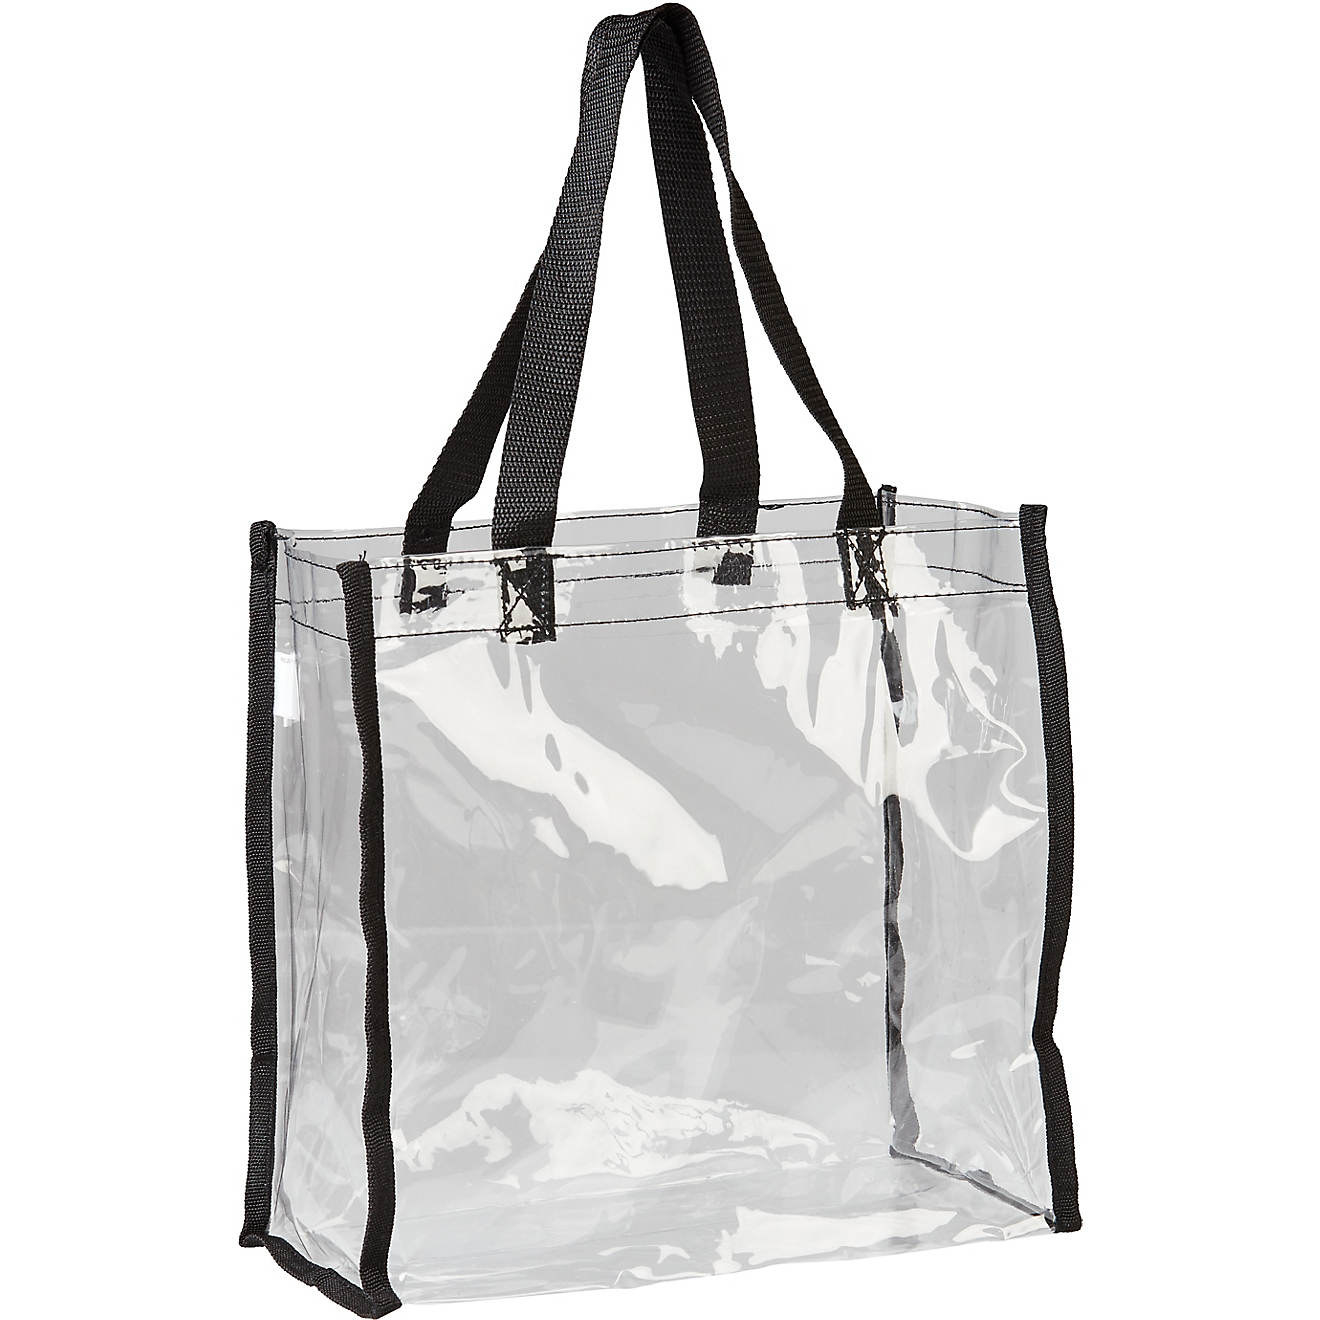 The clear bag